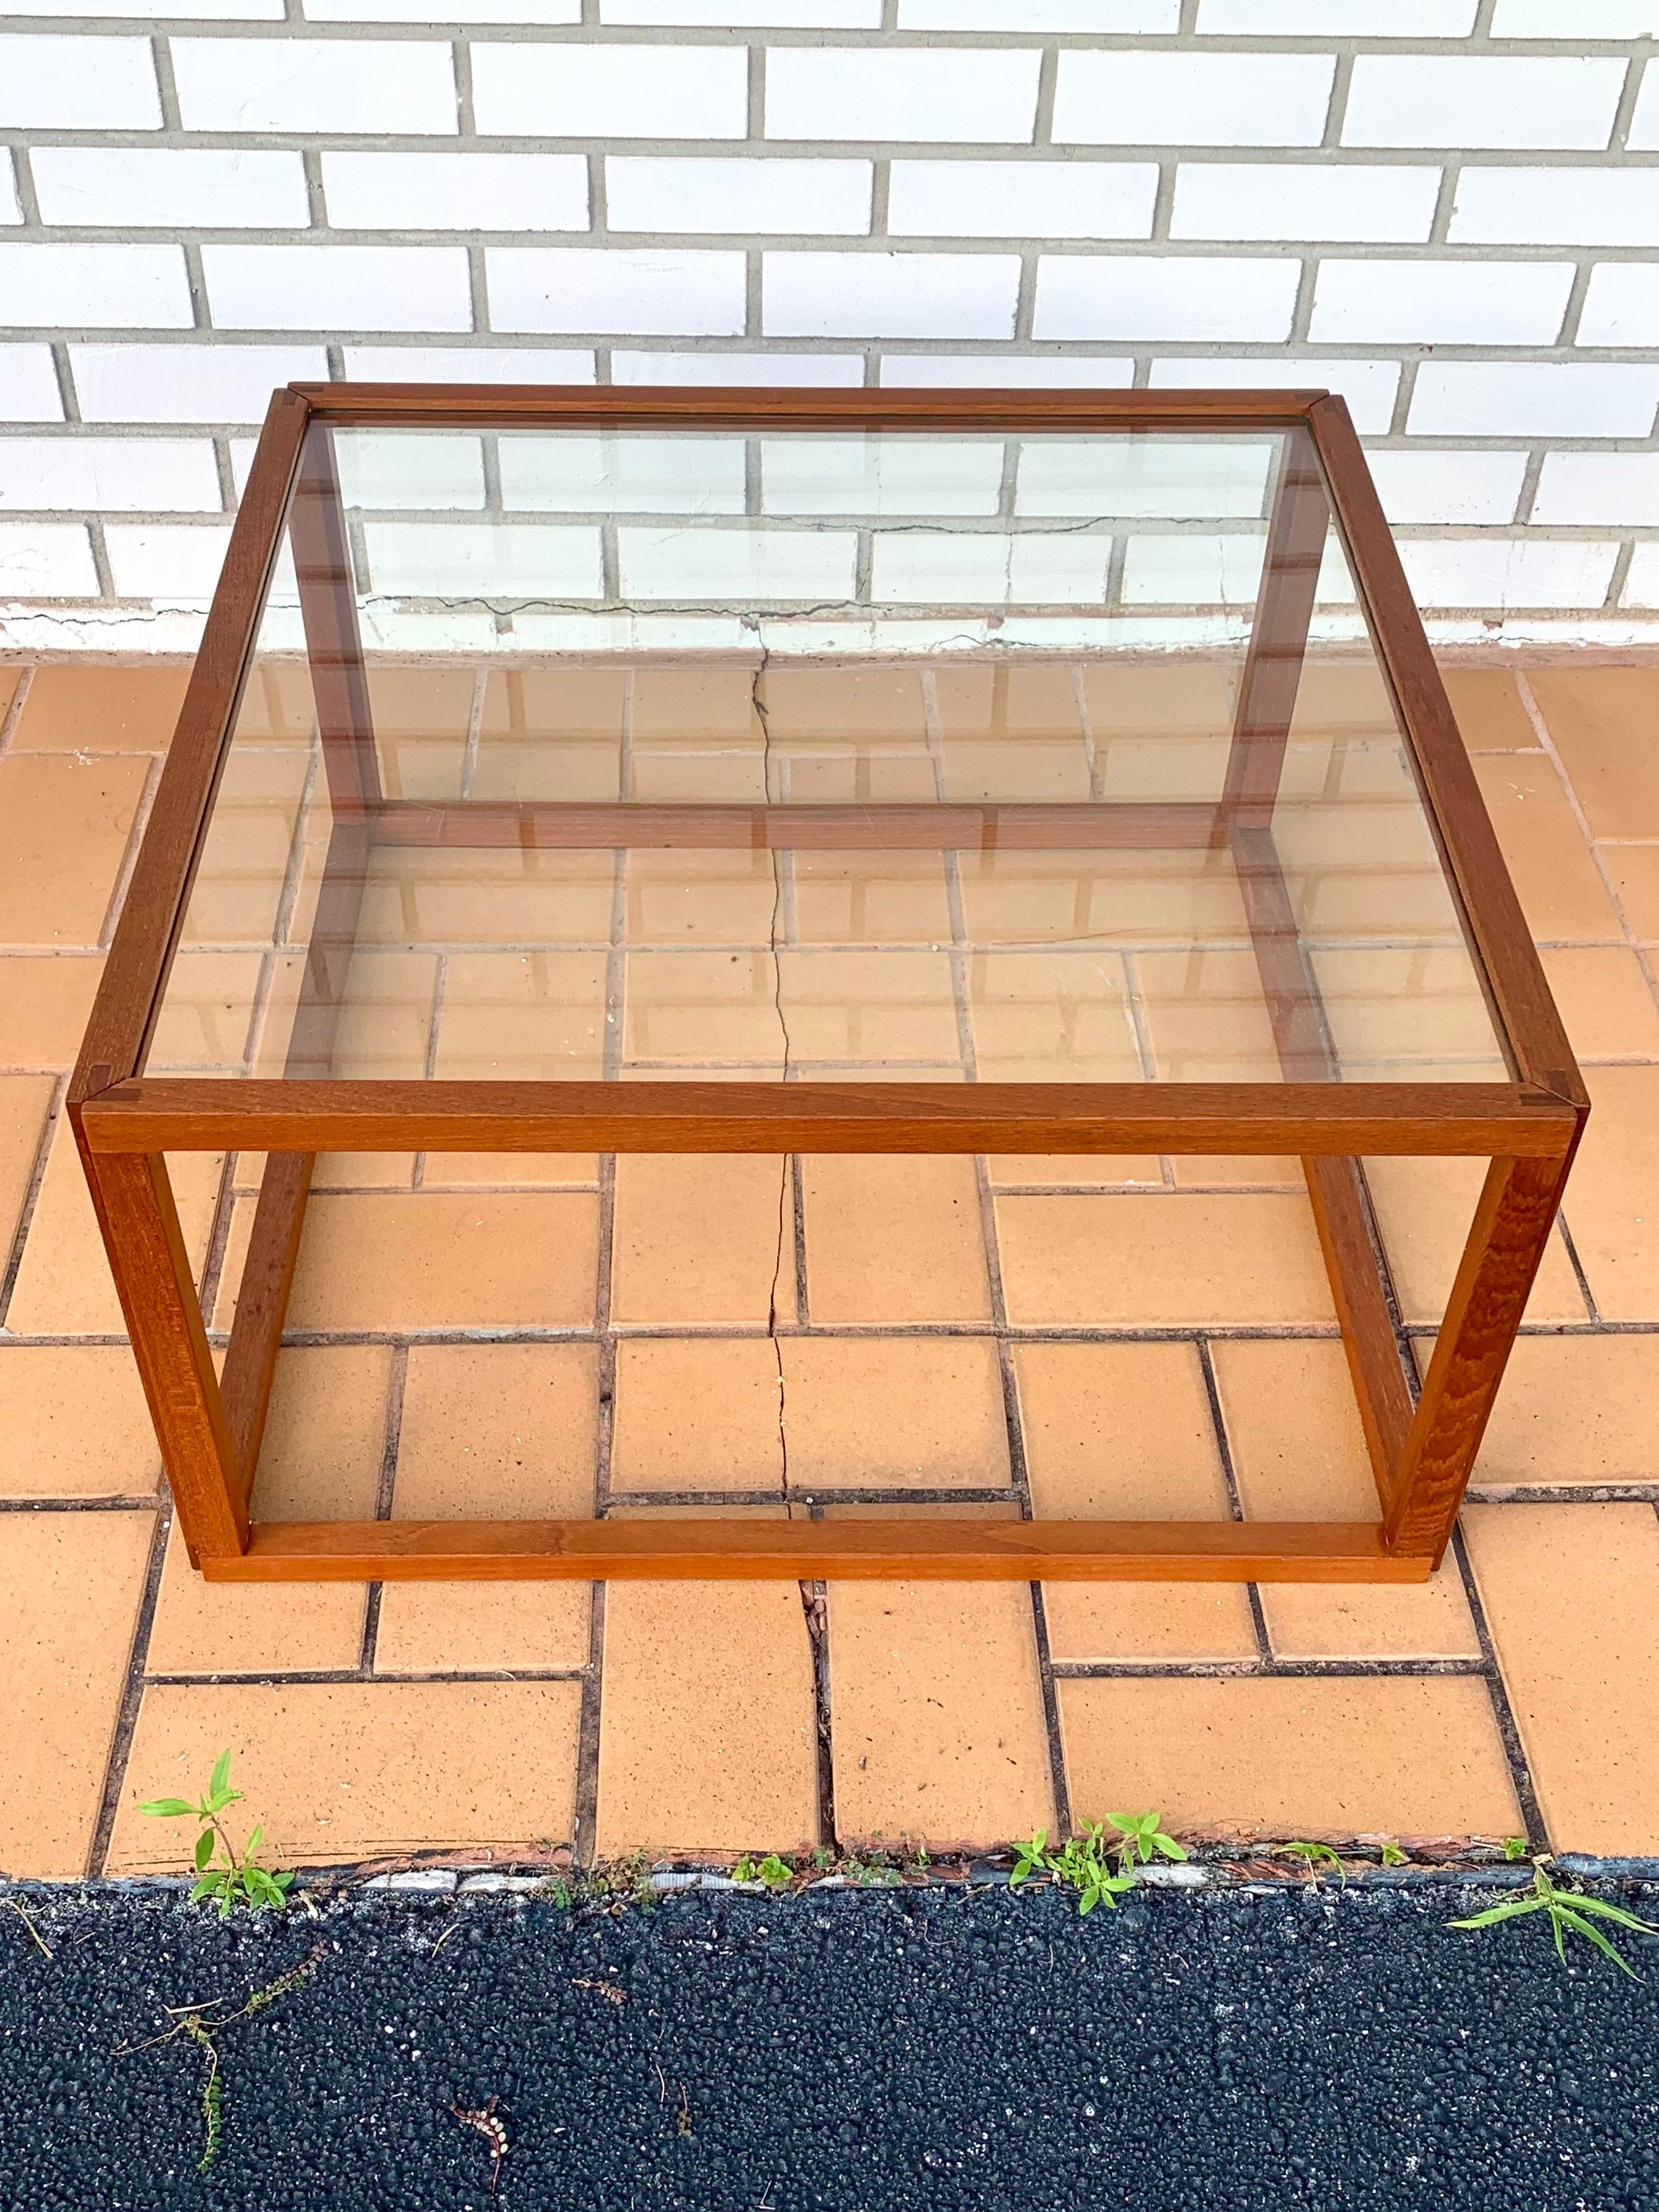 Mid-Century Modern coffee table by Kai Kristiansen. Made from solid teak wood and glass. Refinished. Gorgeous minimalist design offering a sleek and elegant profile. Simple and organic form. Frame is cut so the glass fits perfectly inside the frame.